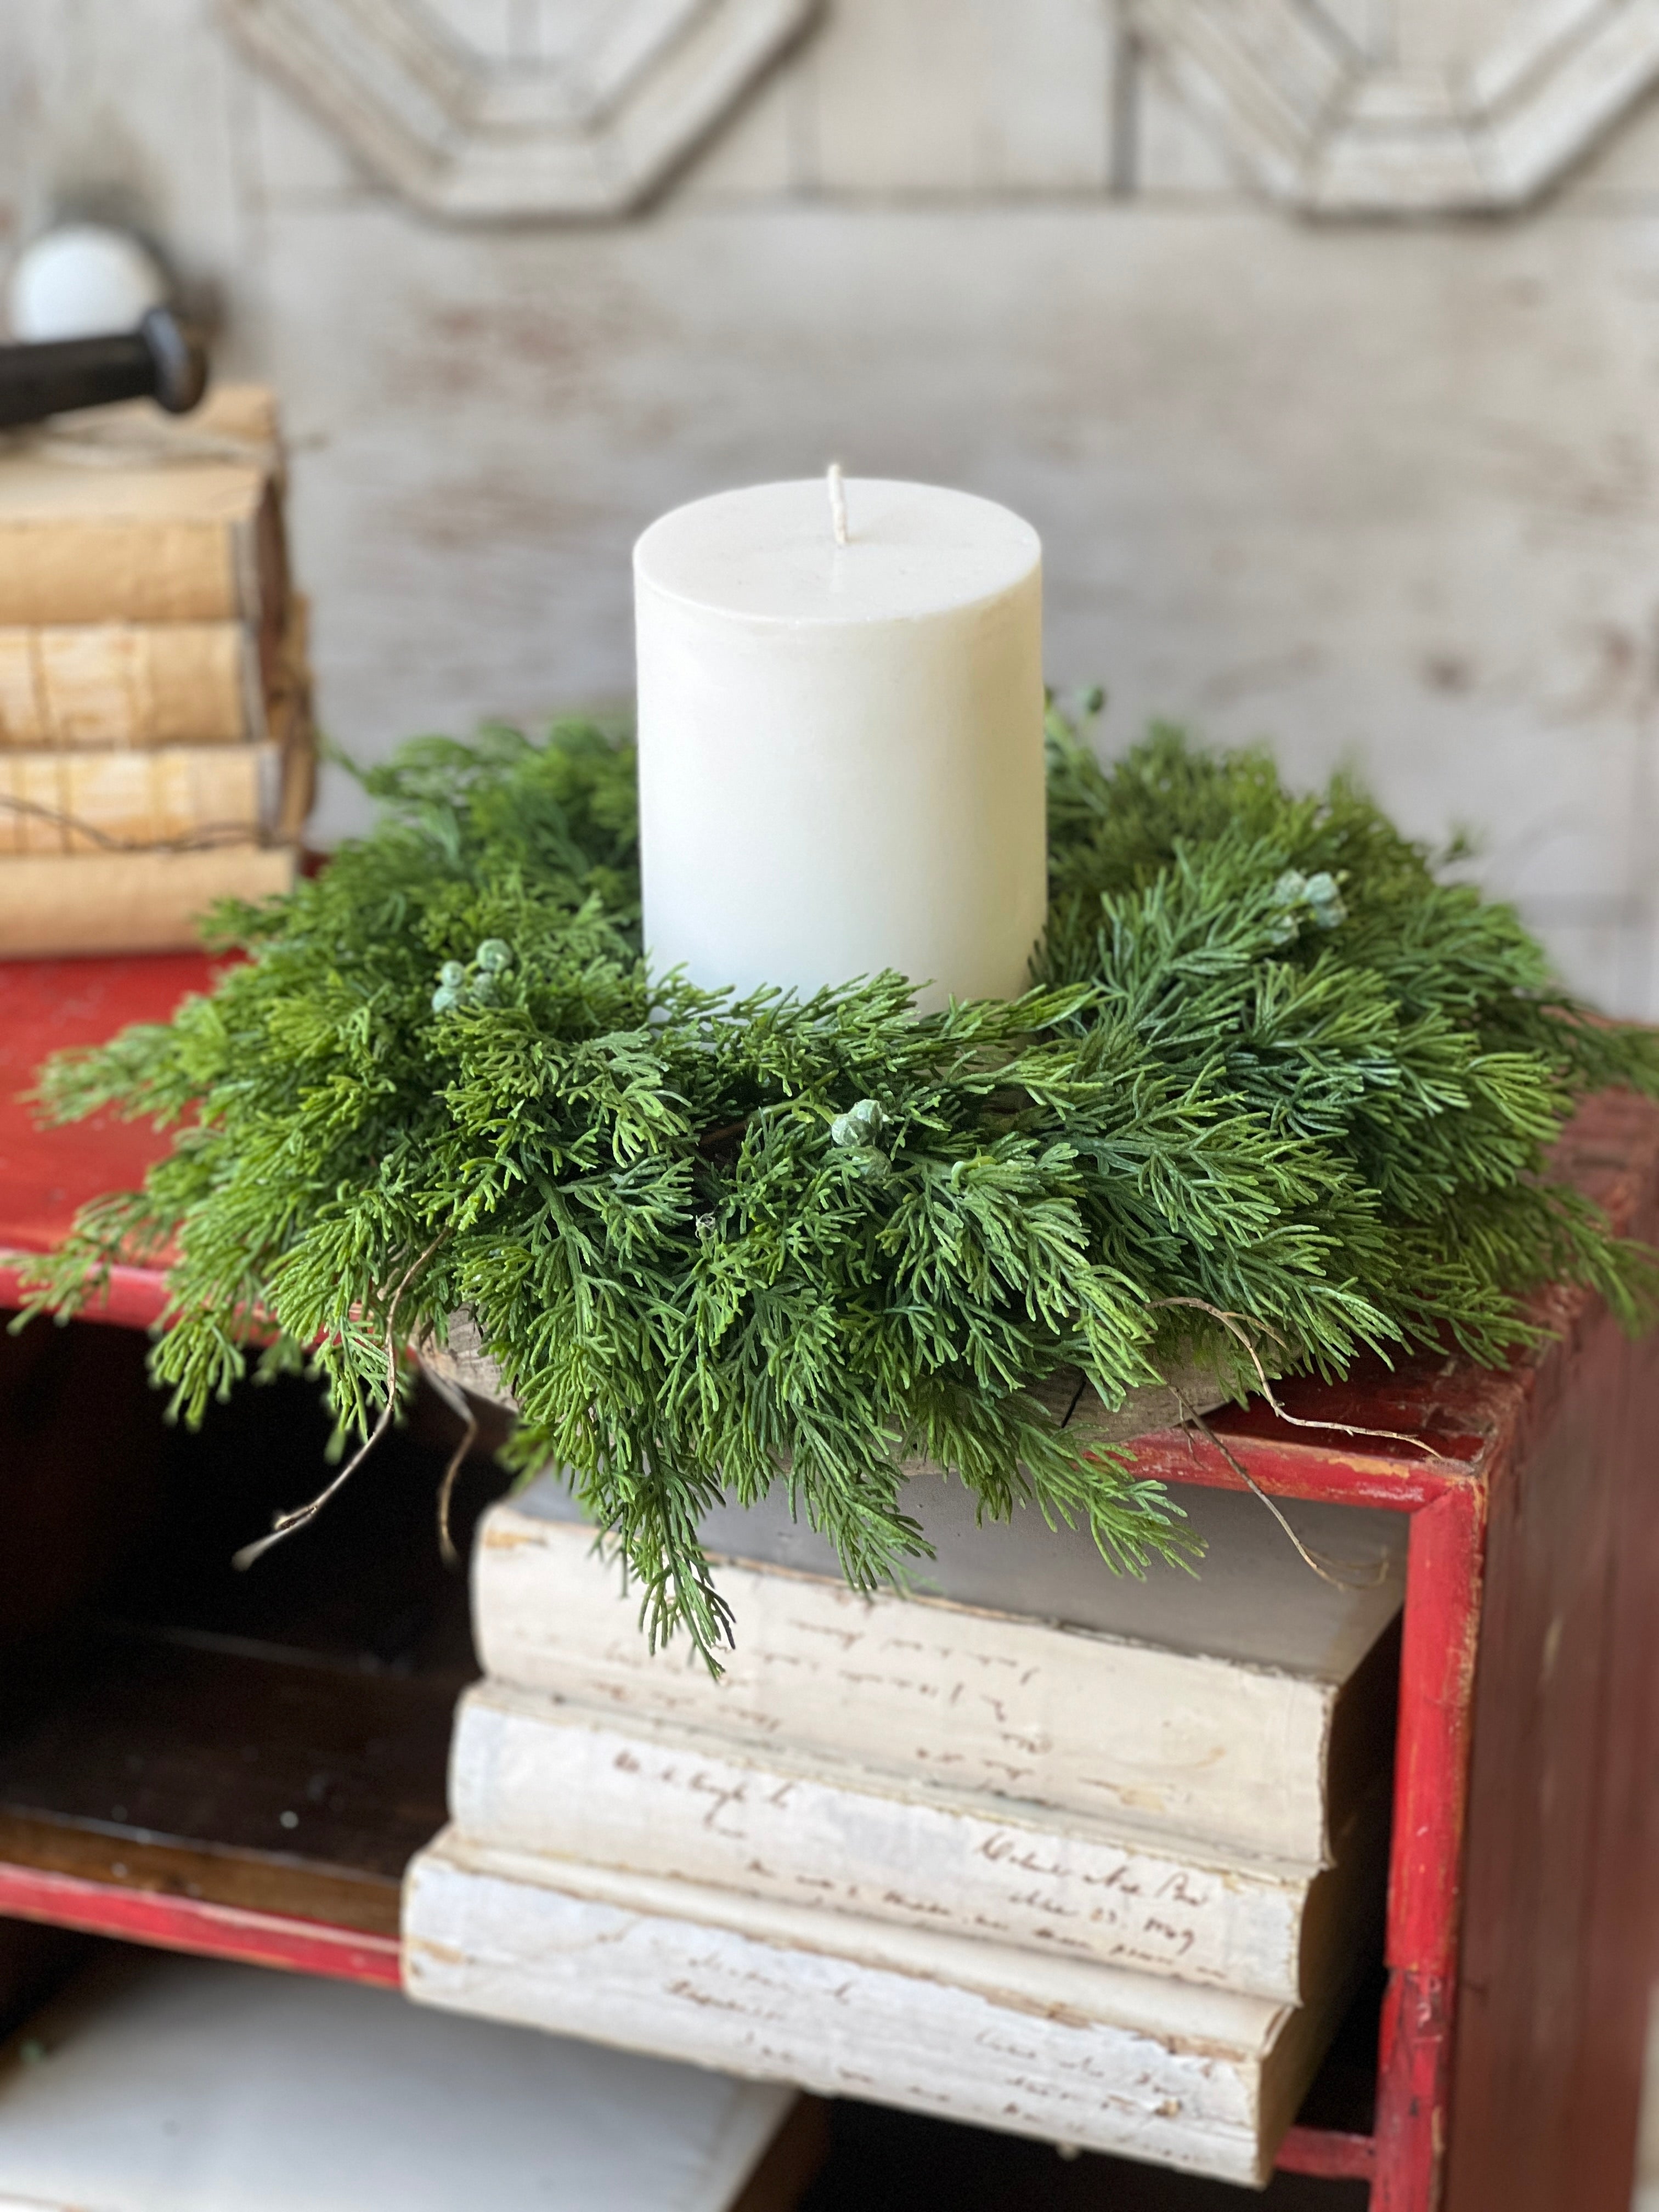 Best Sellers Wholesale Decor | Lancaster Home & Holiday